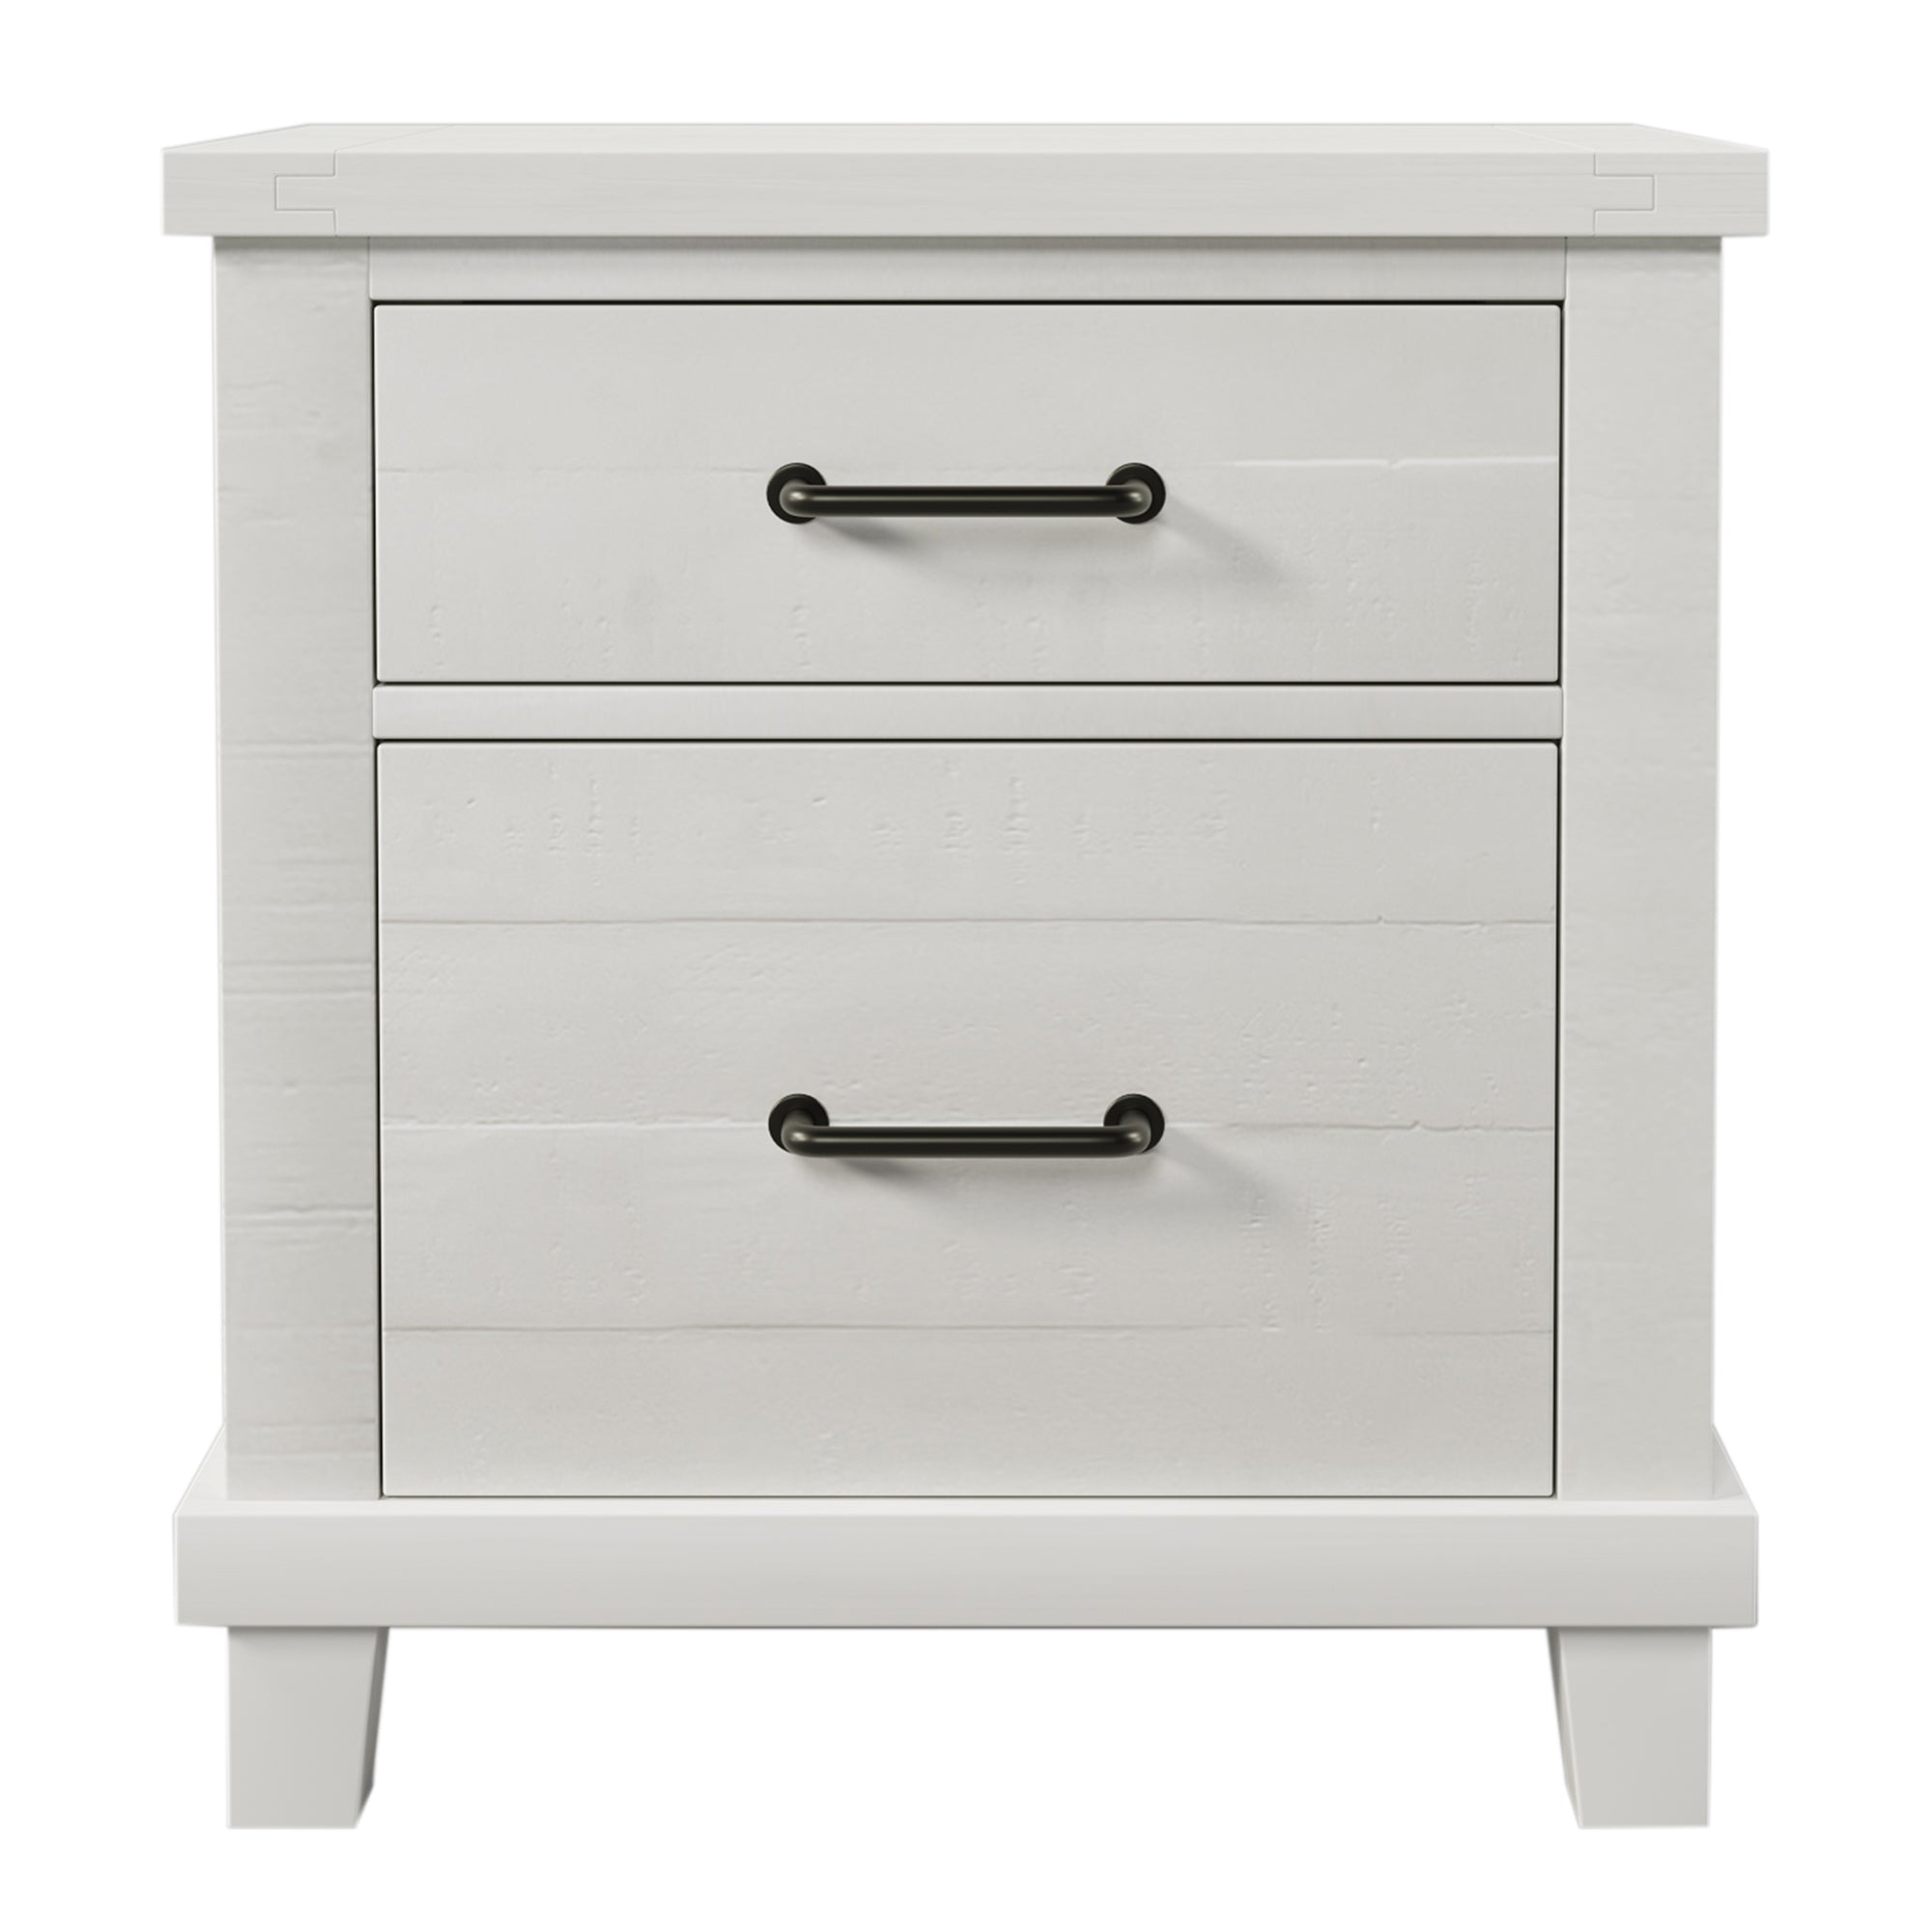 Solid Pine Wood Two-Drawer Nightstand - Nightstands